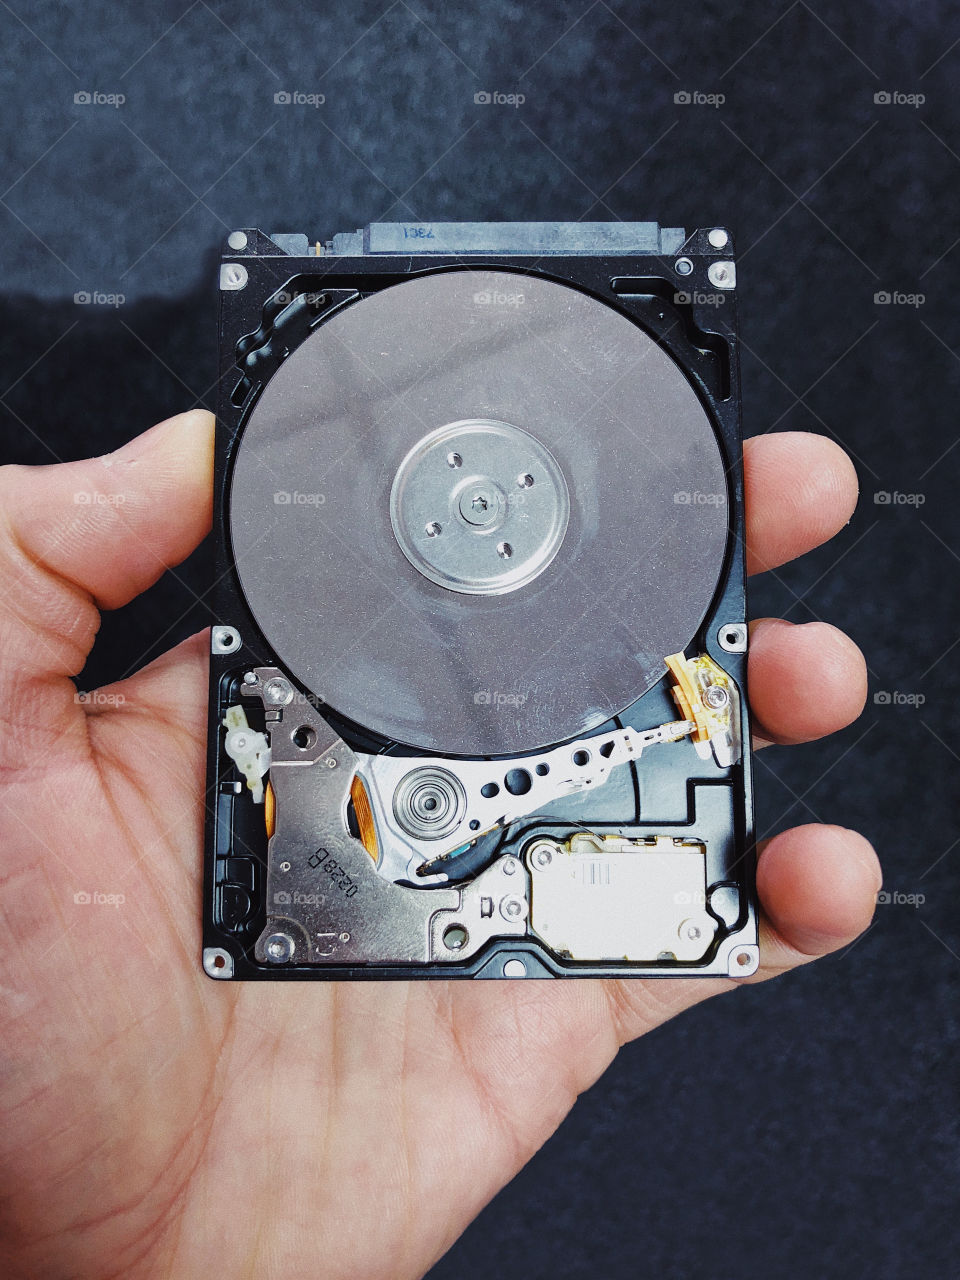 Exposed HDD...